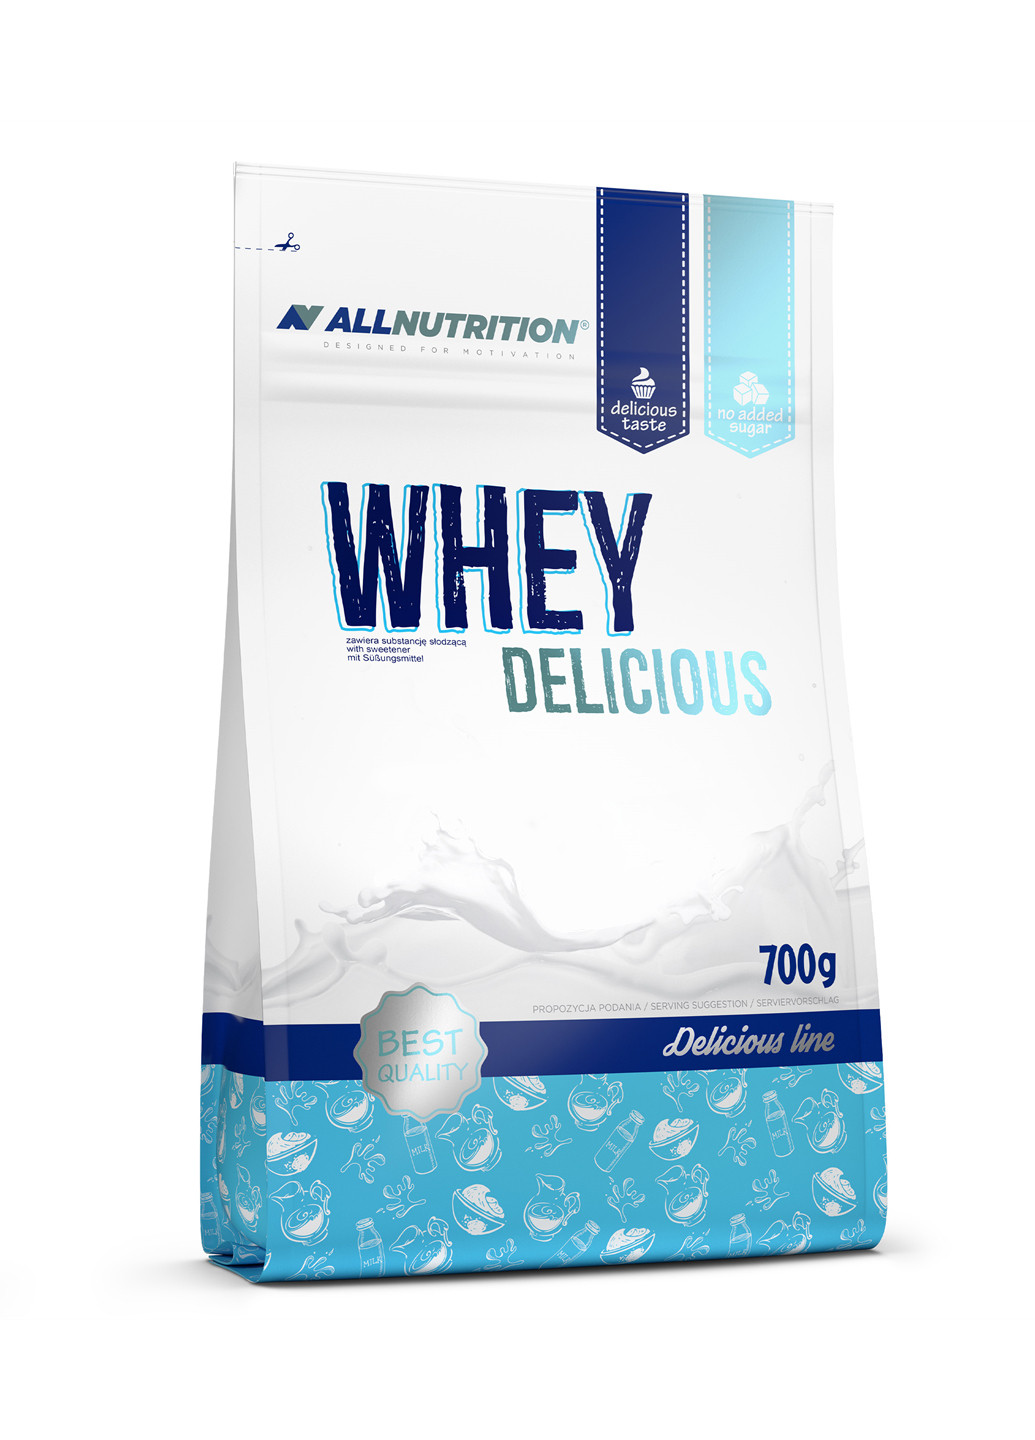 Сыроваточный протеин Whey Delicious - 700g Cookie with Whipped cream ] Allnutrition (240154101)